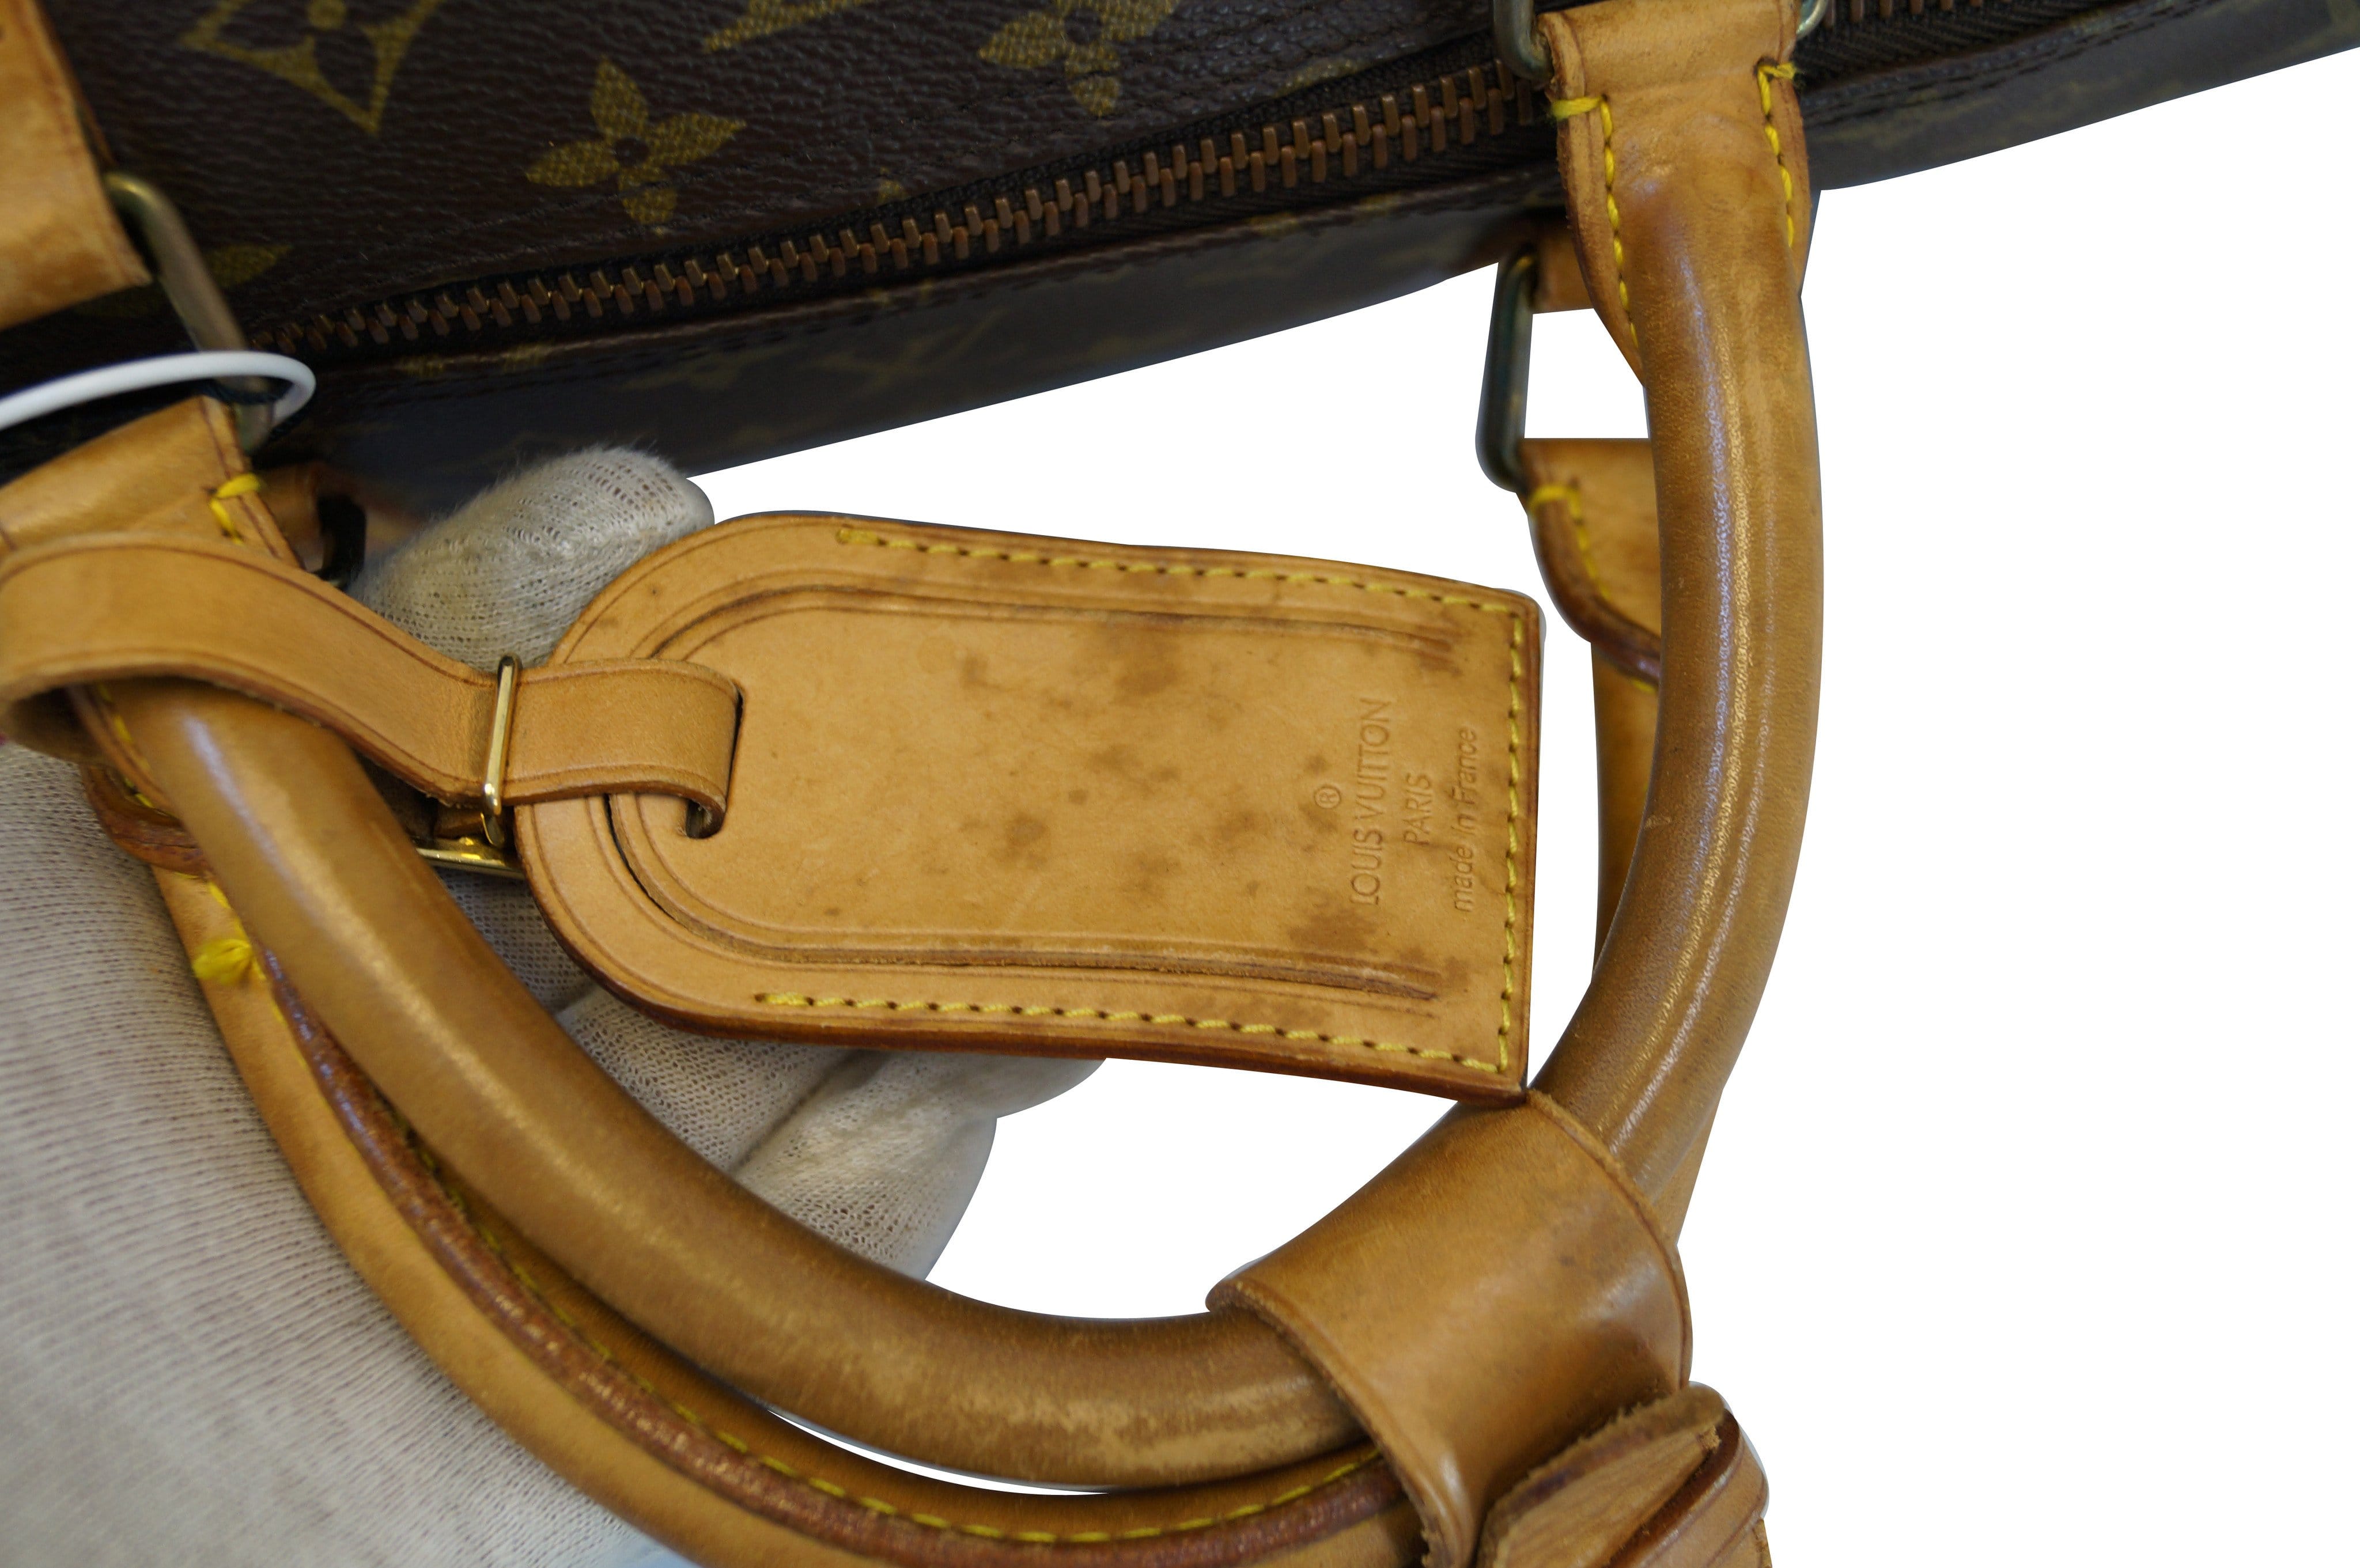 LV Monogram Keepall 60 Travel Bag - Luggage & Travelling Accessories -  Costume & Dressing Accessories